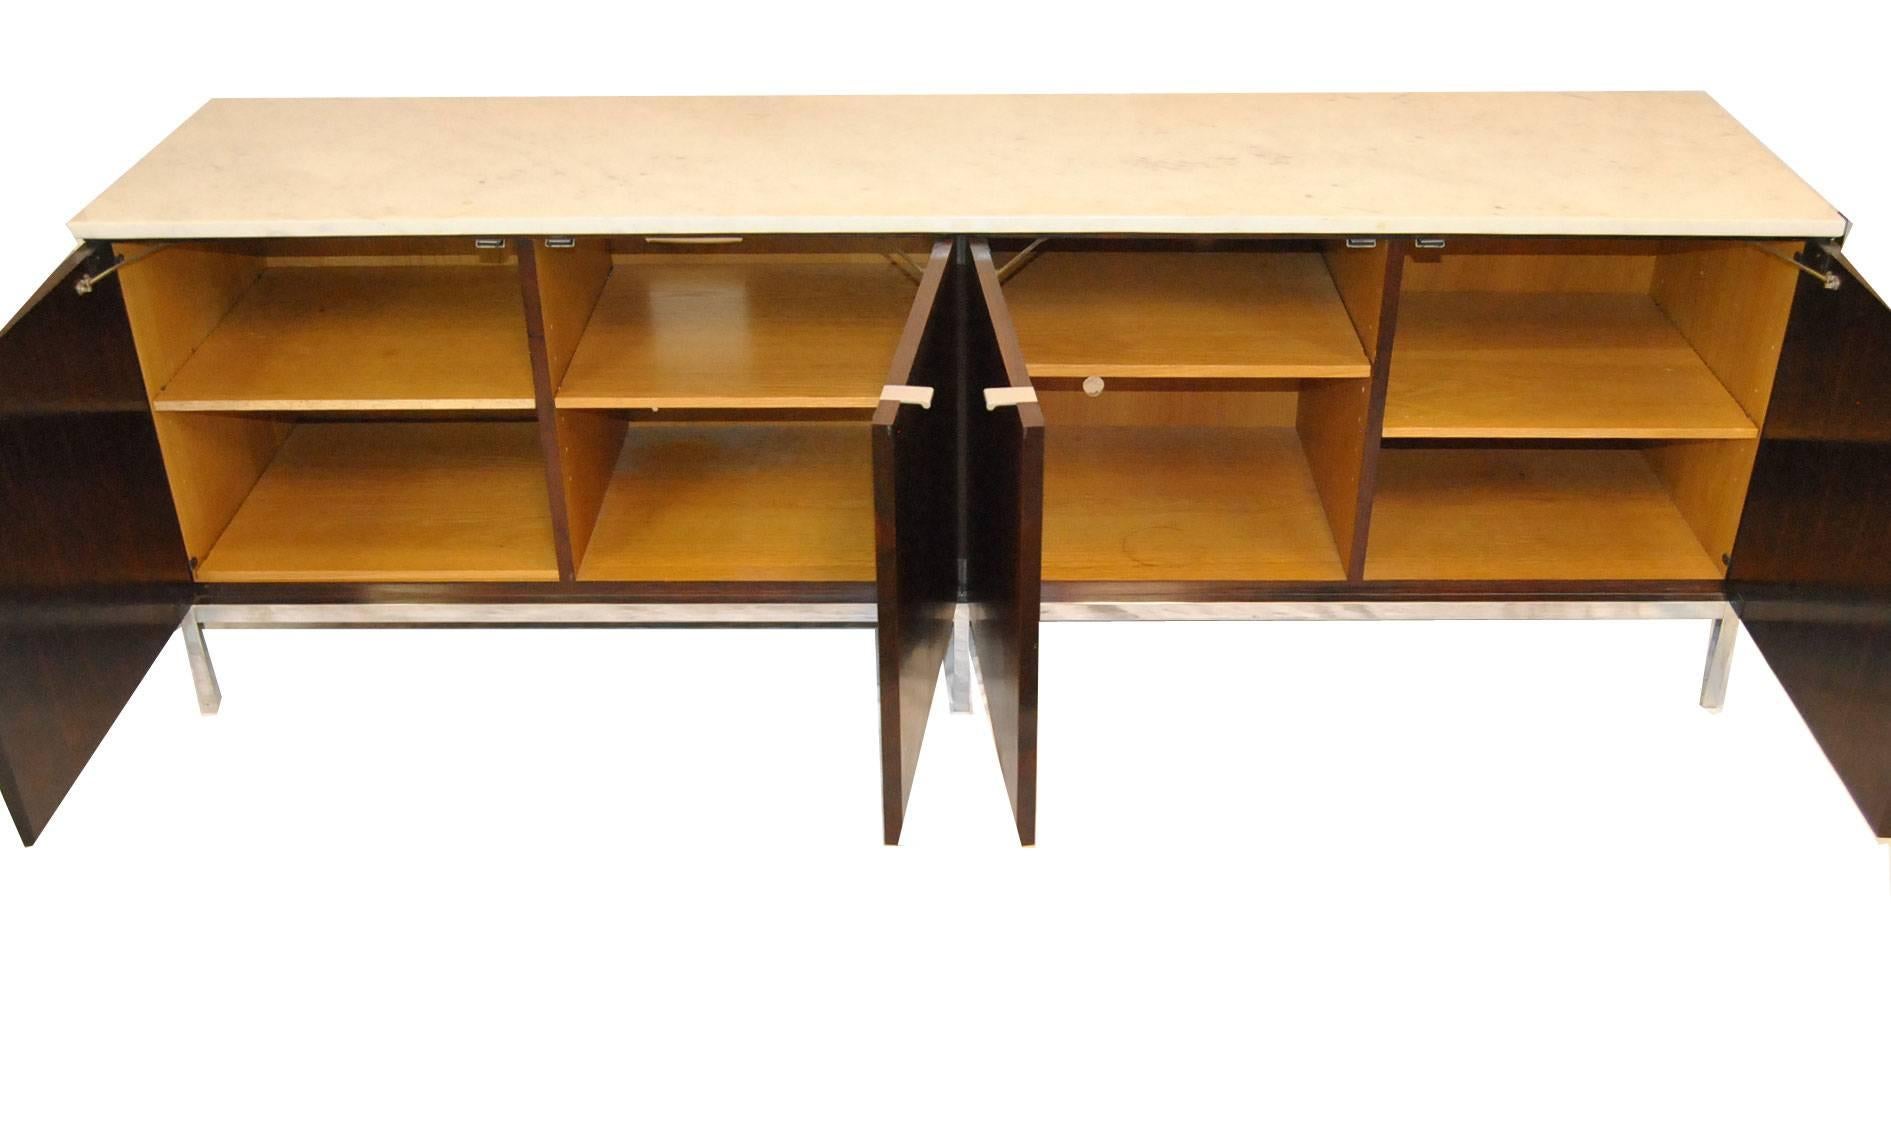 A great credenza by Florence Knoll. It features matched grain Brazilian rosewood which sits on a chrome base. The marble-top has rich veining and no stains. The interior has four storage areas with one adjustable shelf in each section. This was used